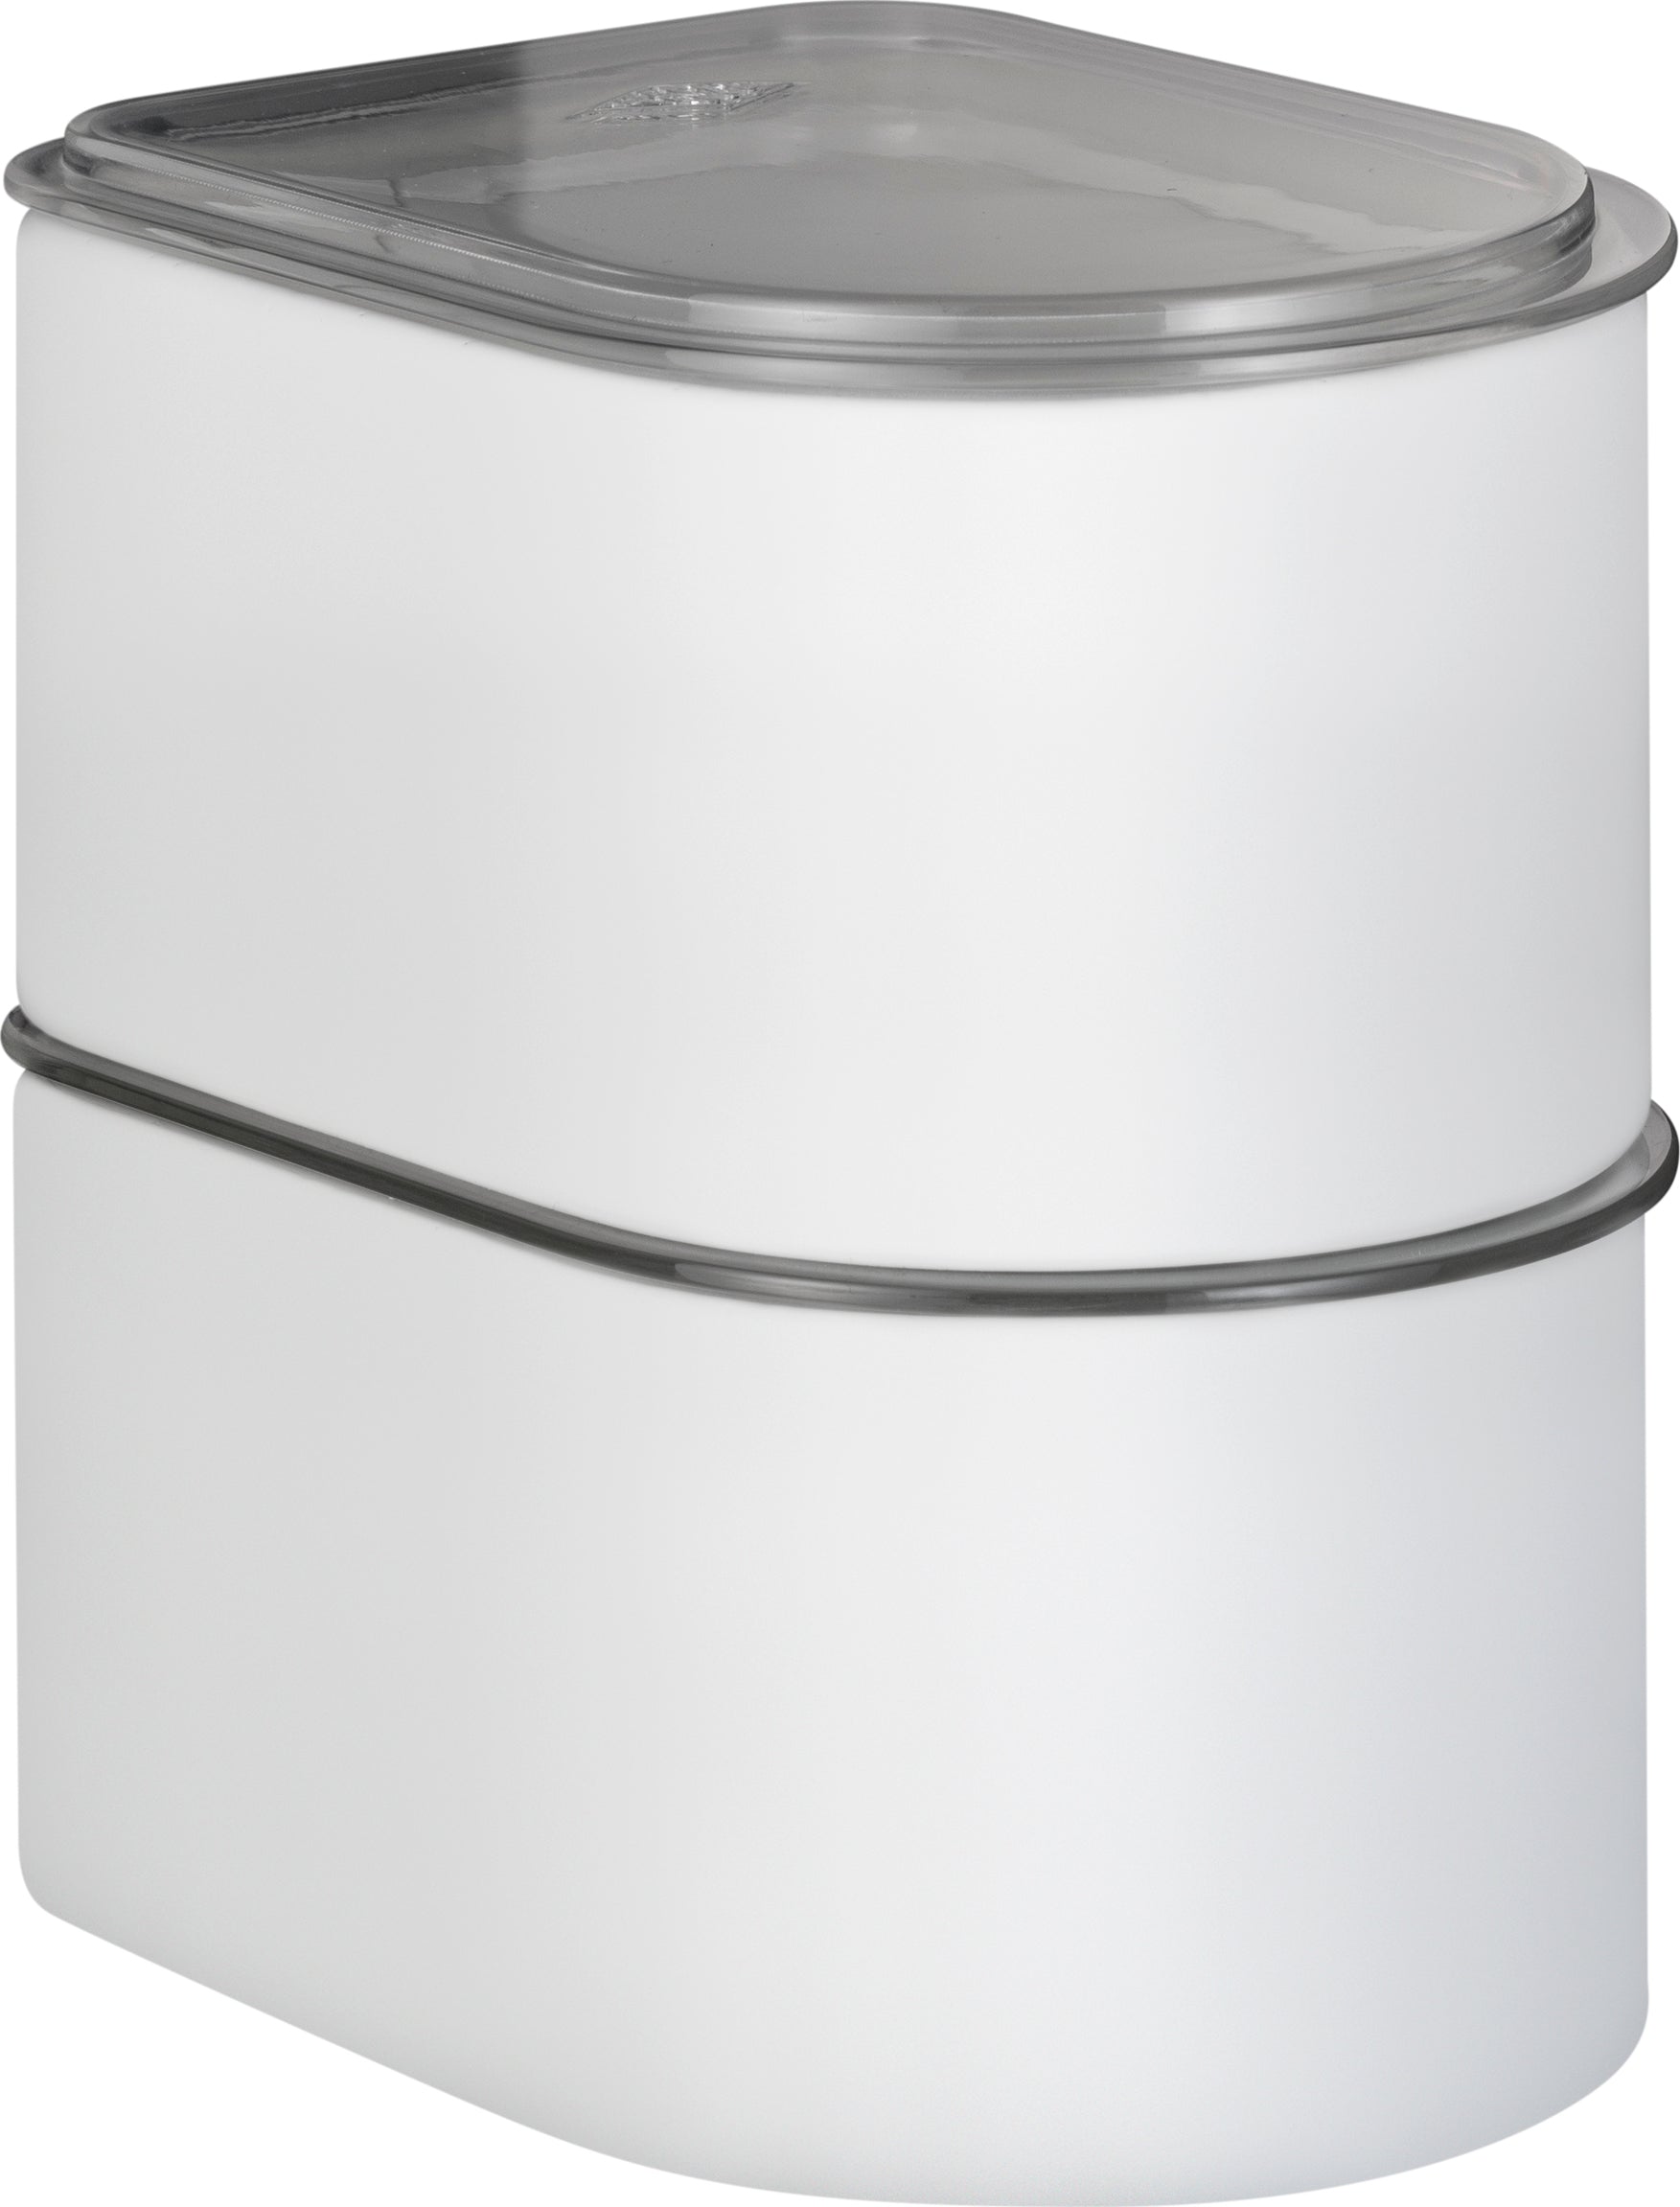 Wesco Canister 1 Litre With Acrylic Lid, Graphite Matt